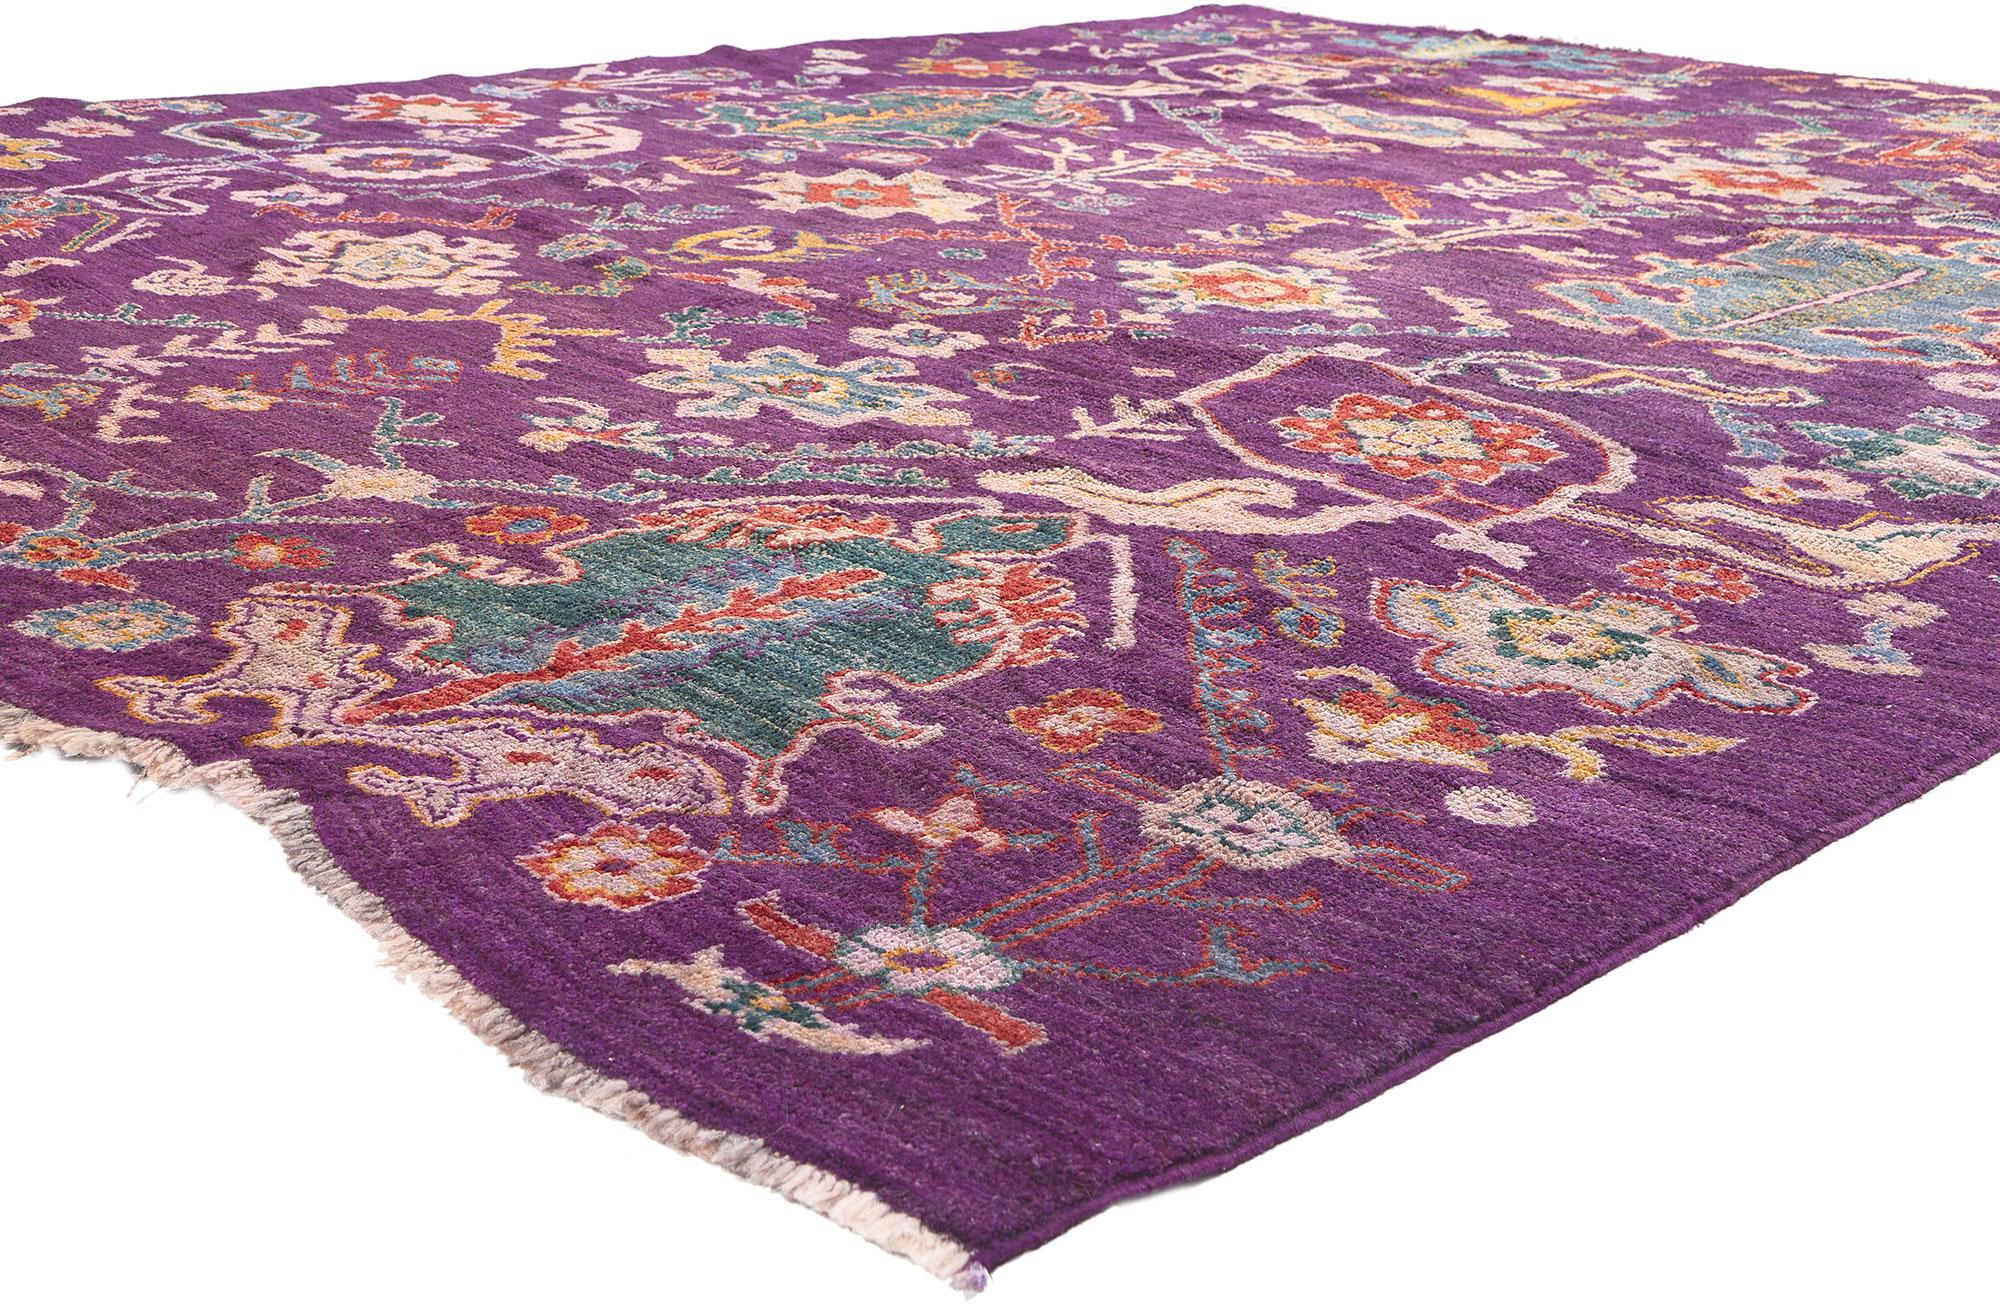 80817 Modern Purple Oushak Rug, 09'03 x 11'08. Experience the vibrant fusion of Maximalist flair and Bohemian exuberance in this modern colorful Oushak rug, where a spectrum of bold colors converges in a delightful dance upon a rich purple